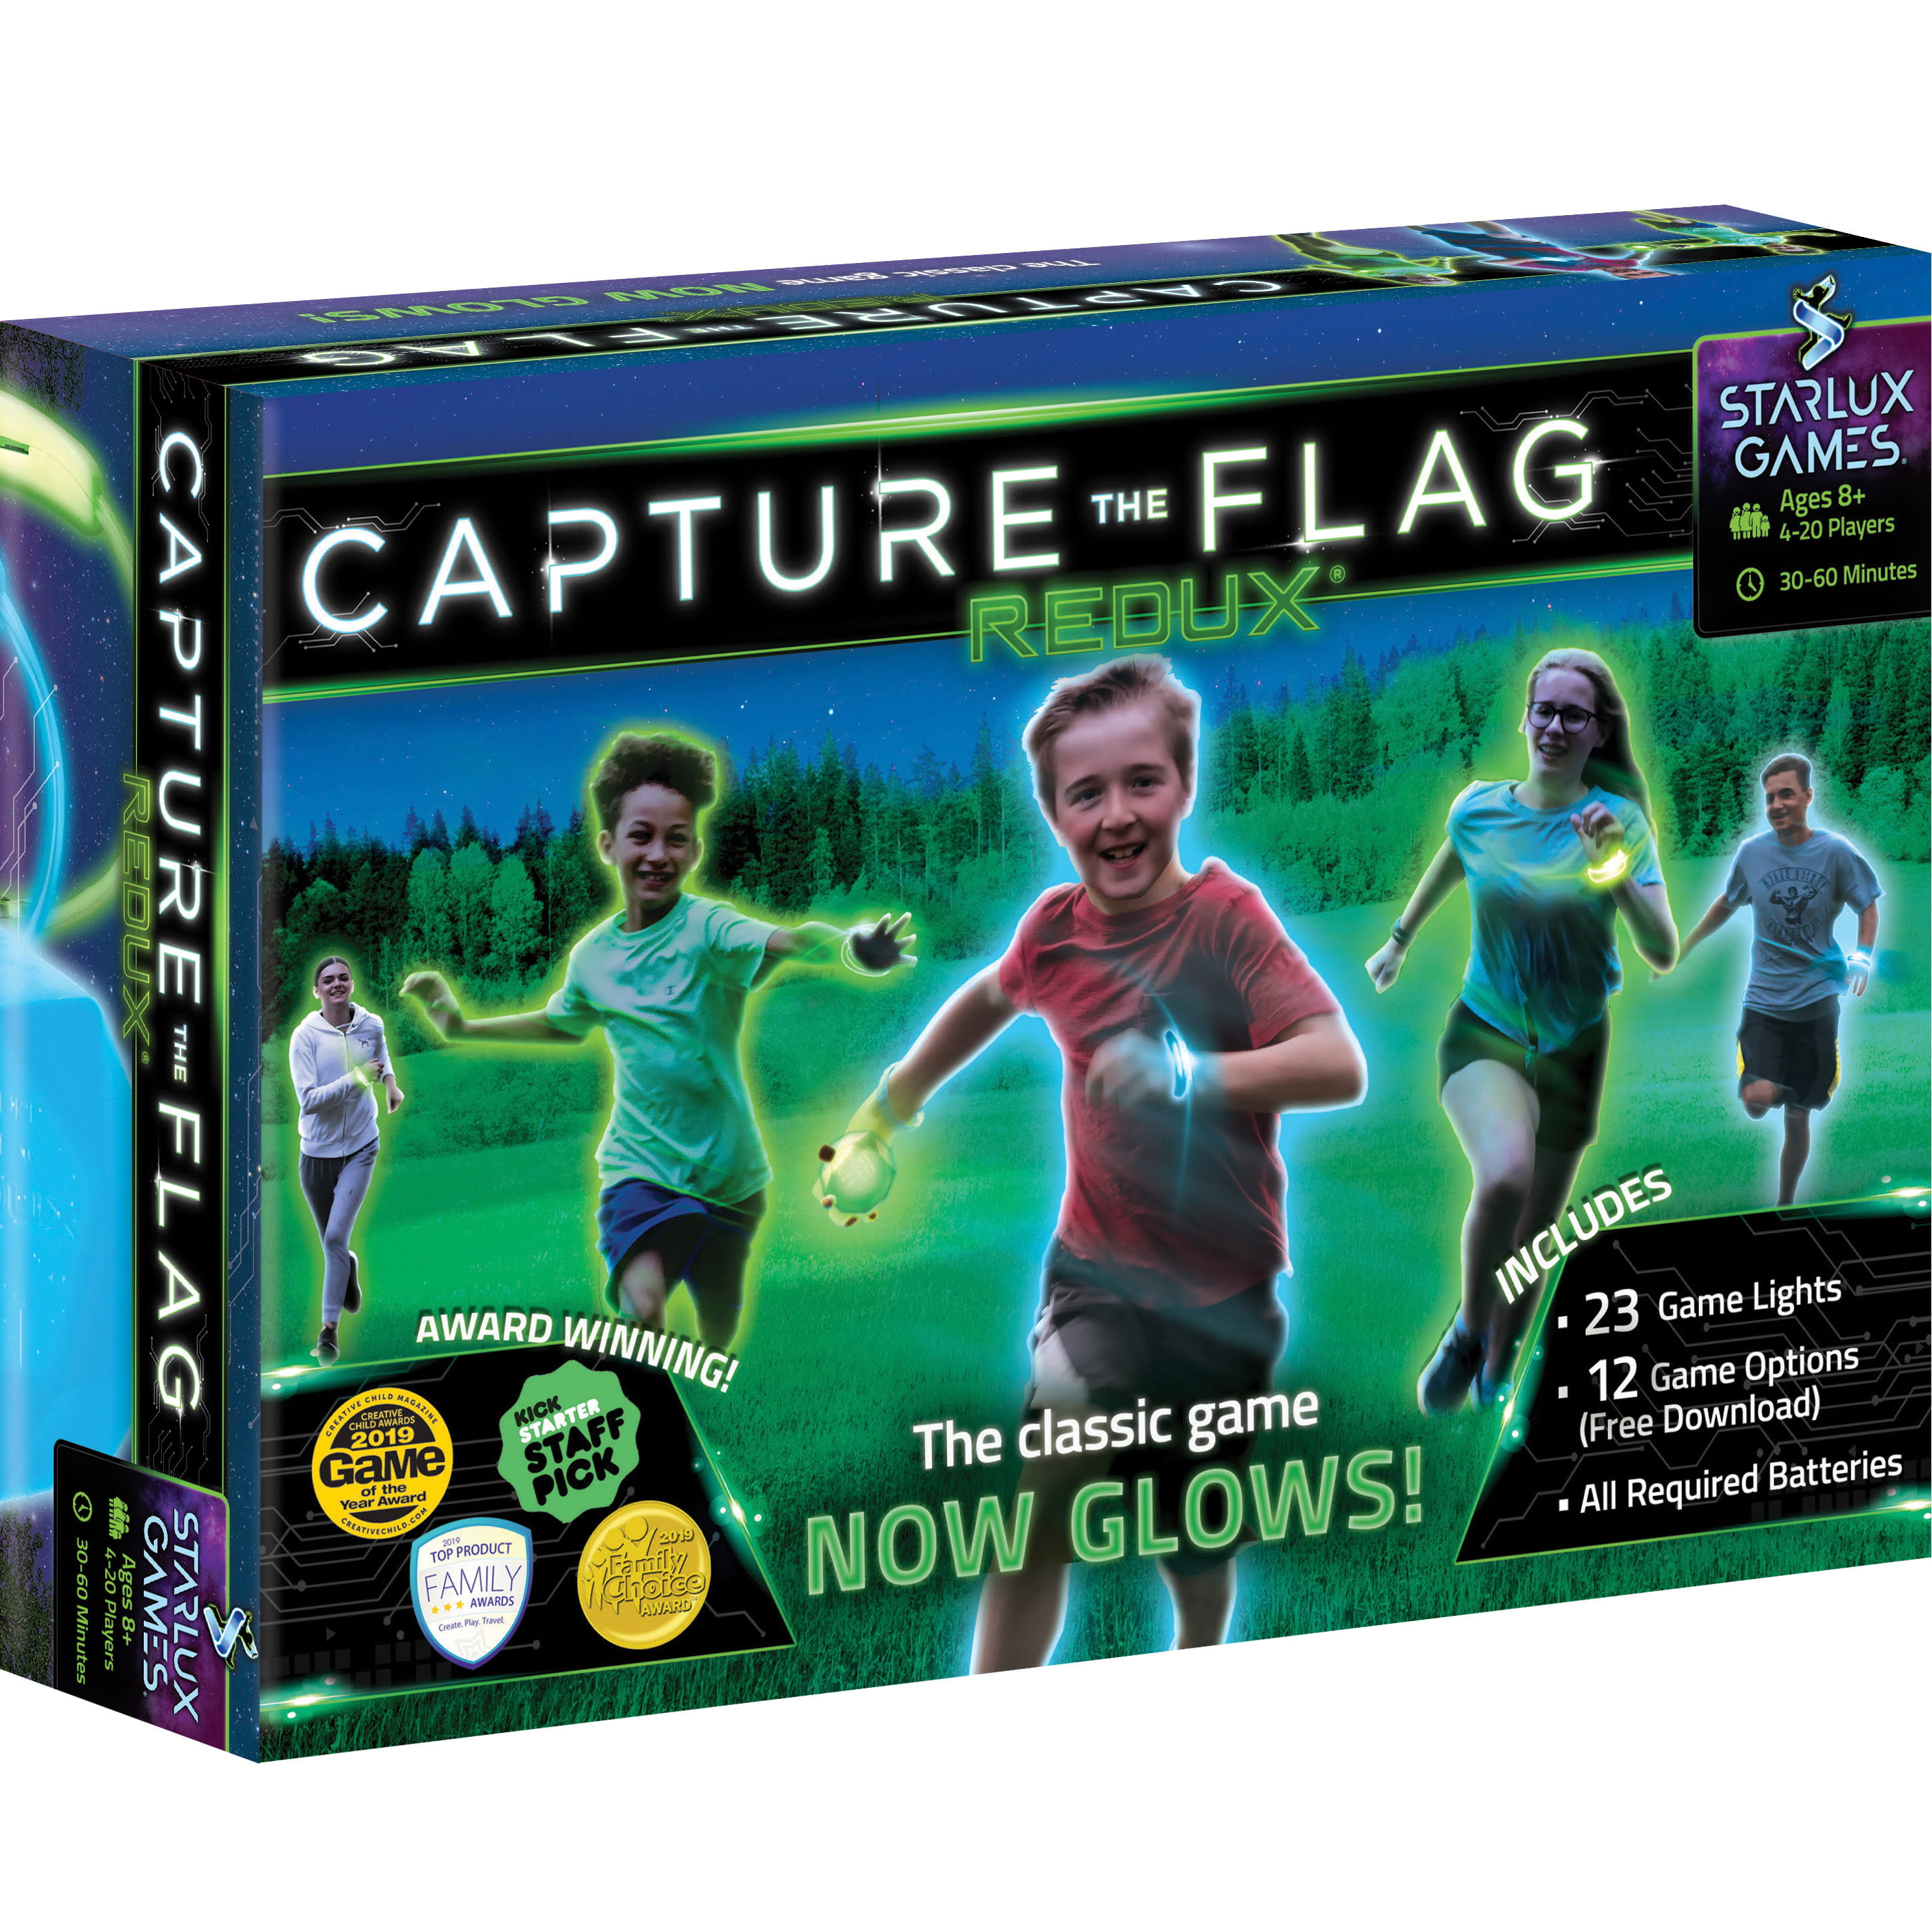 Capture the Flag Redux: A Glow in the Dark Games - for Birthdays, Team Building and Icebreakers